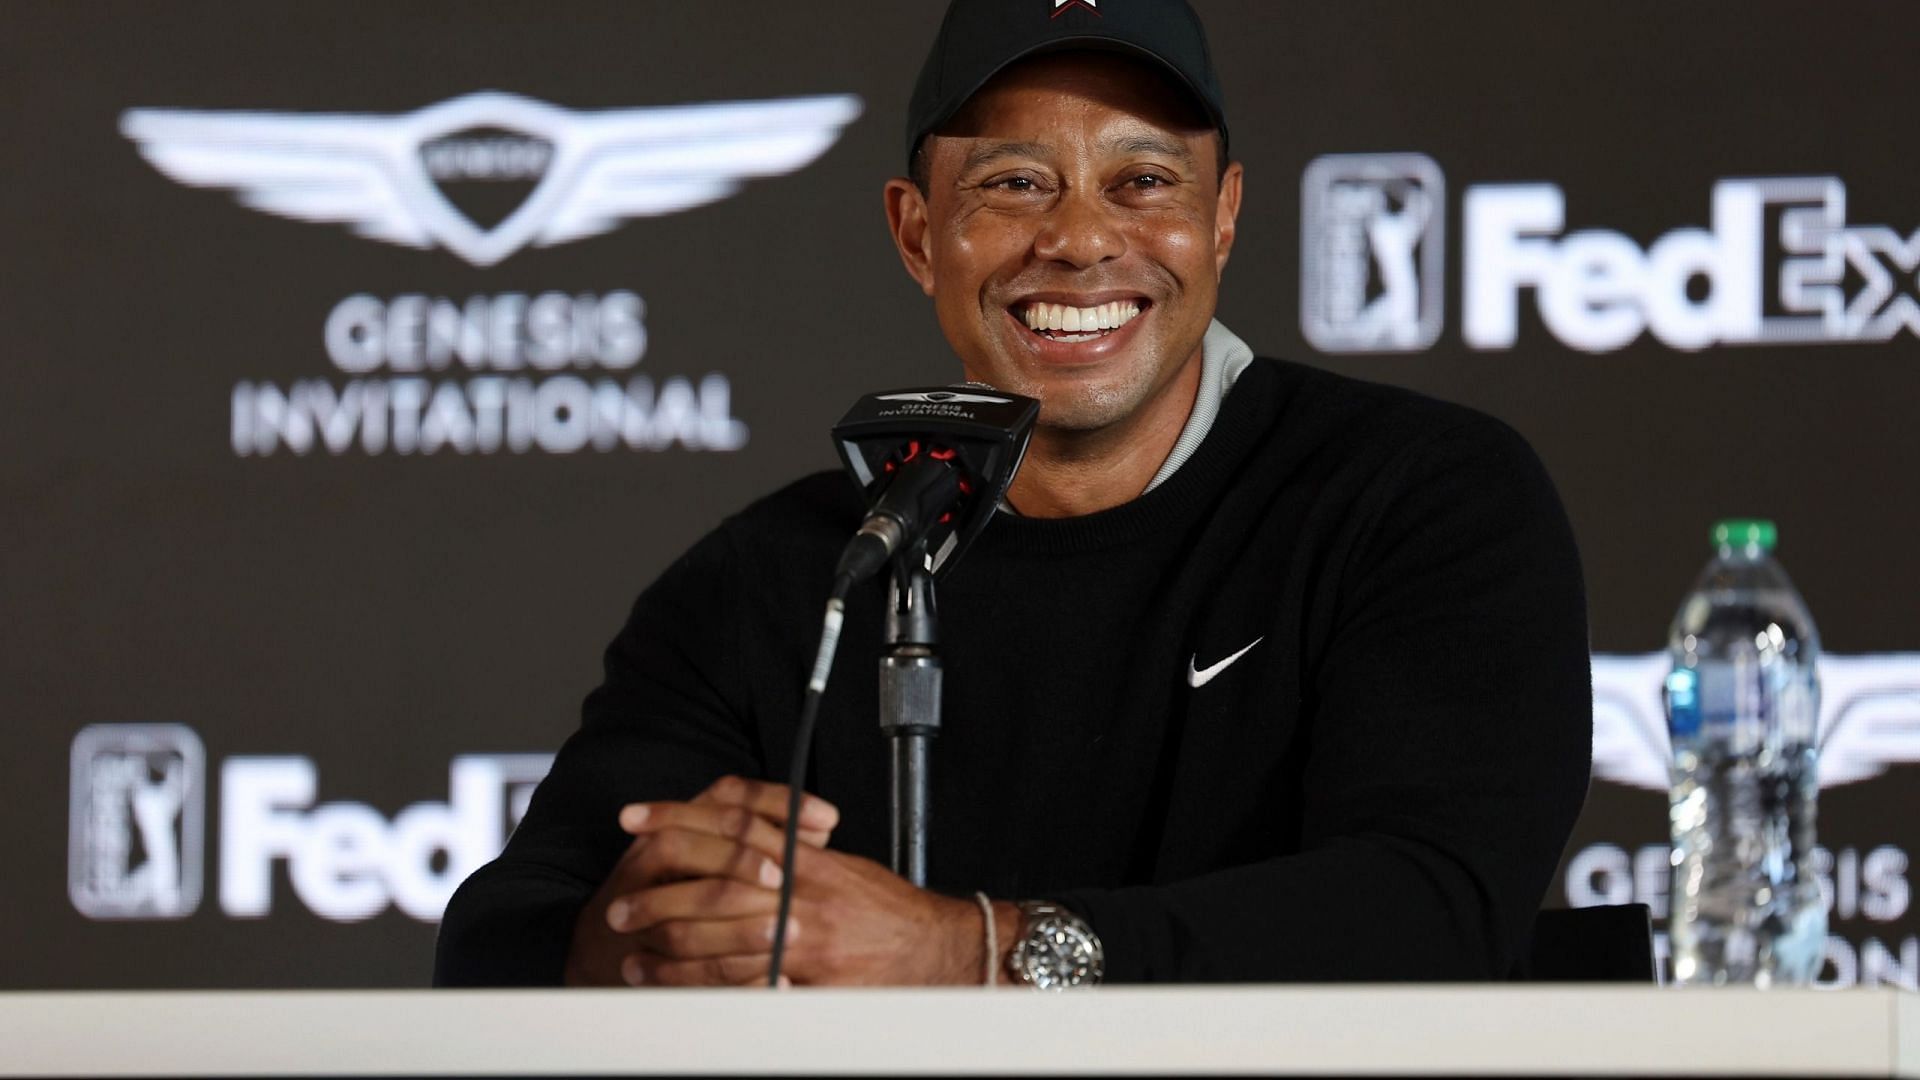 Tiger Woods is also the host of Genesis Invitational